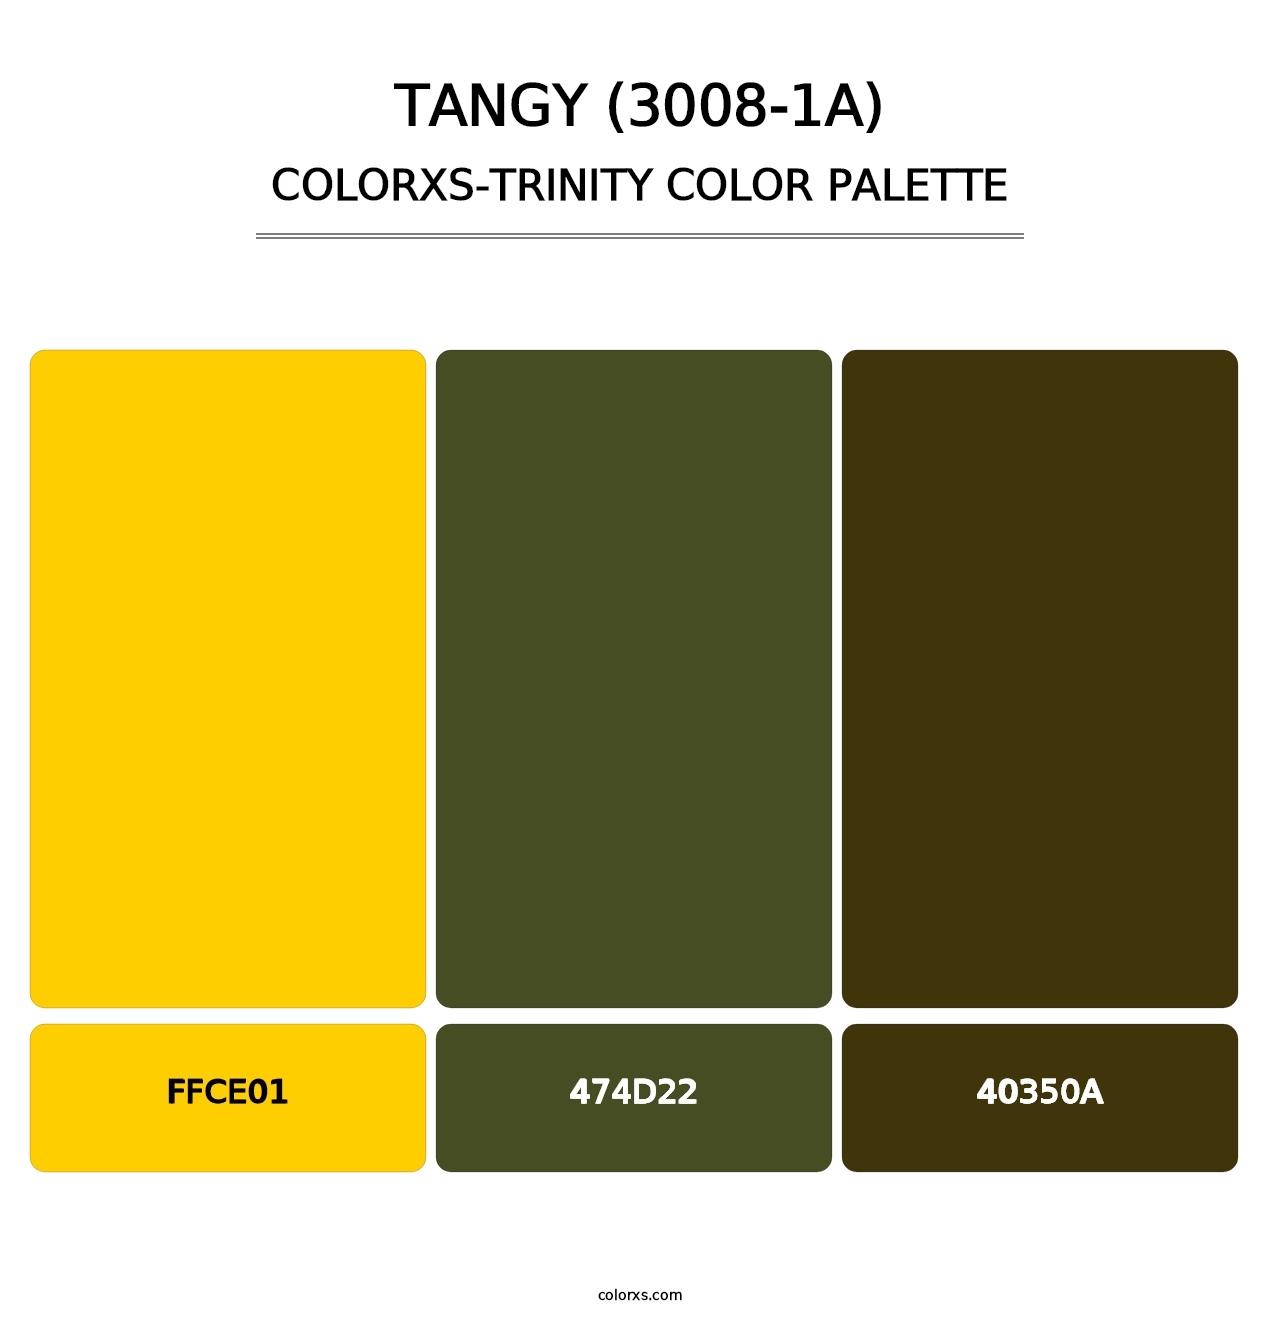 Tangy (3008-1A) - Colorxs Trinity Palette